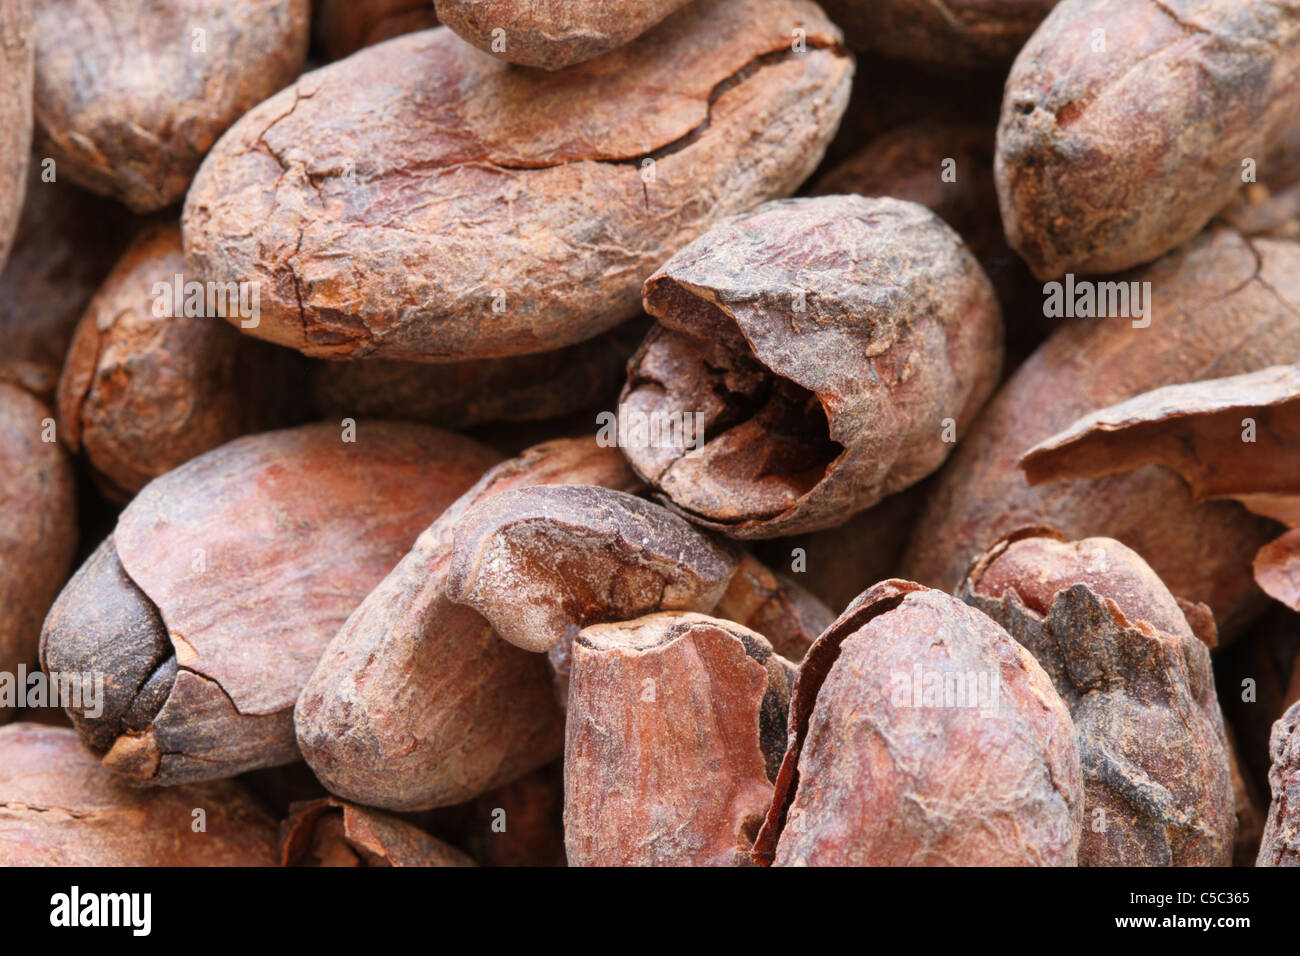 cocoa or cacao beans macro background image Stock Photo